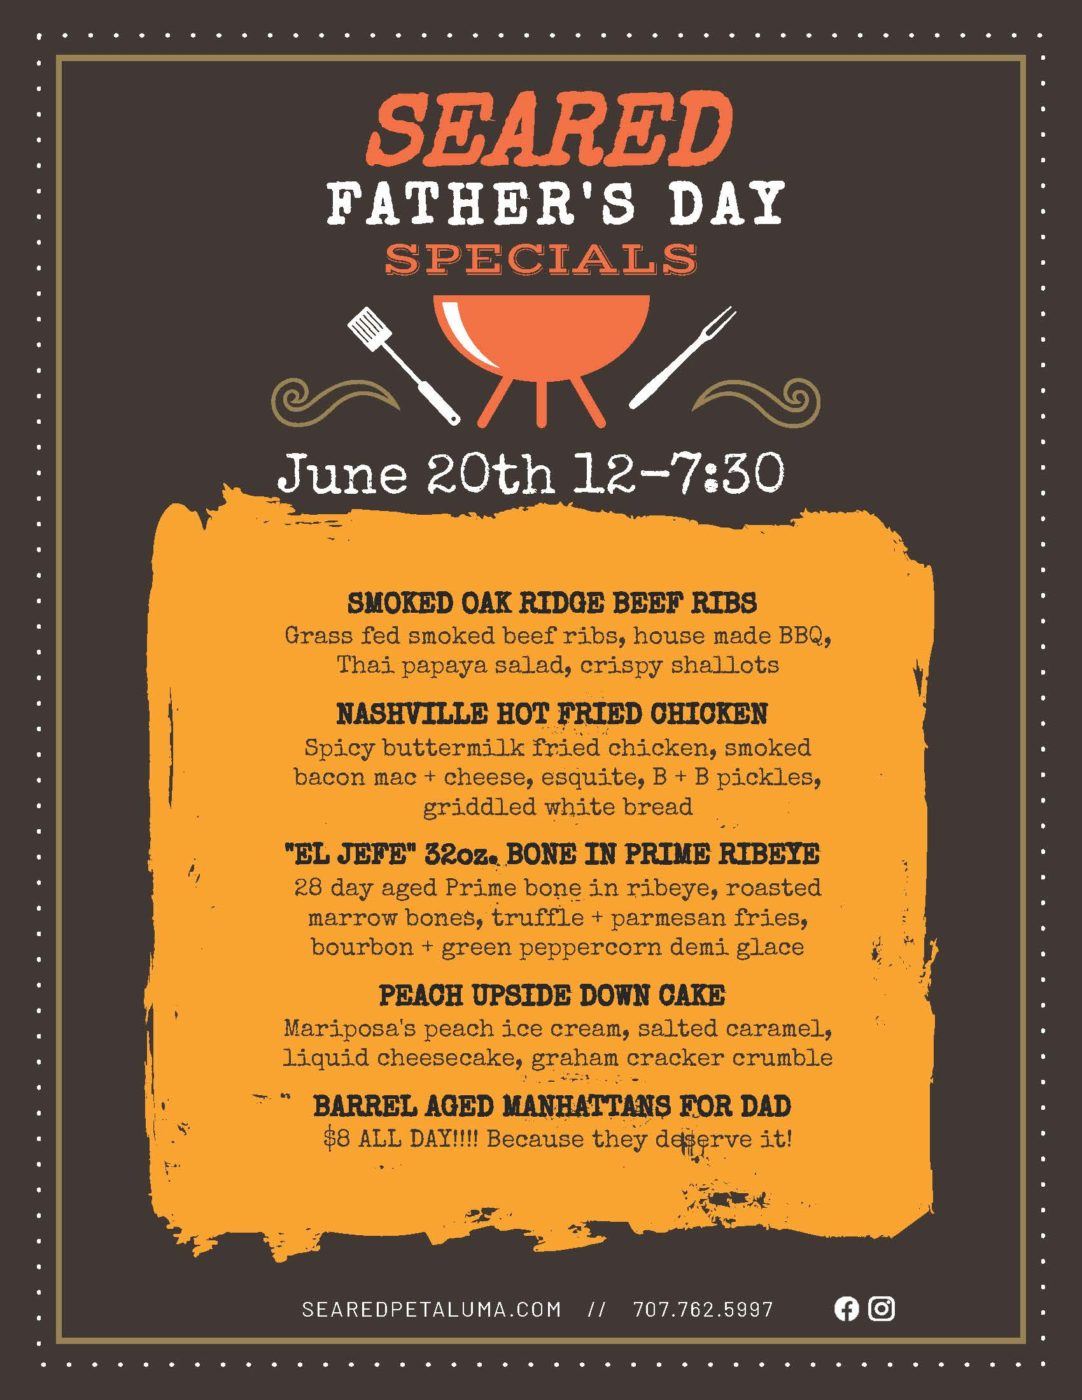 Father's Day Specials at Seared June 20th, 2021